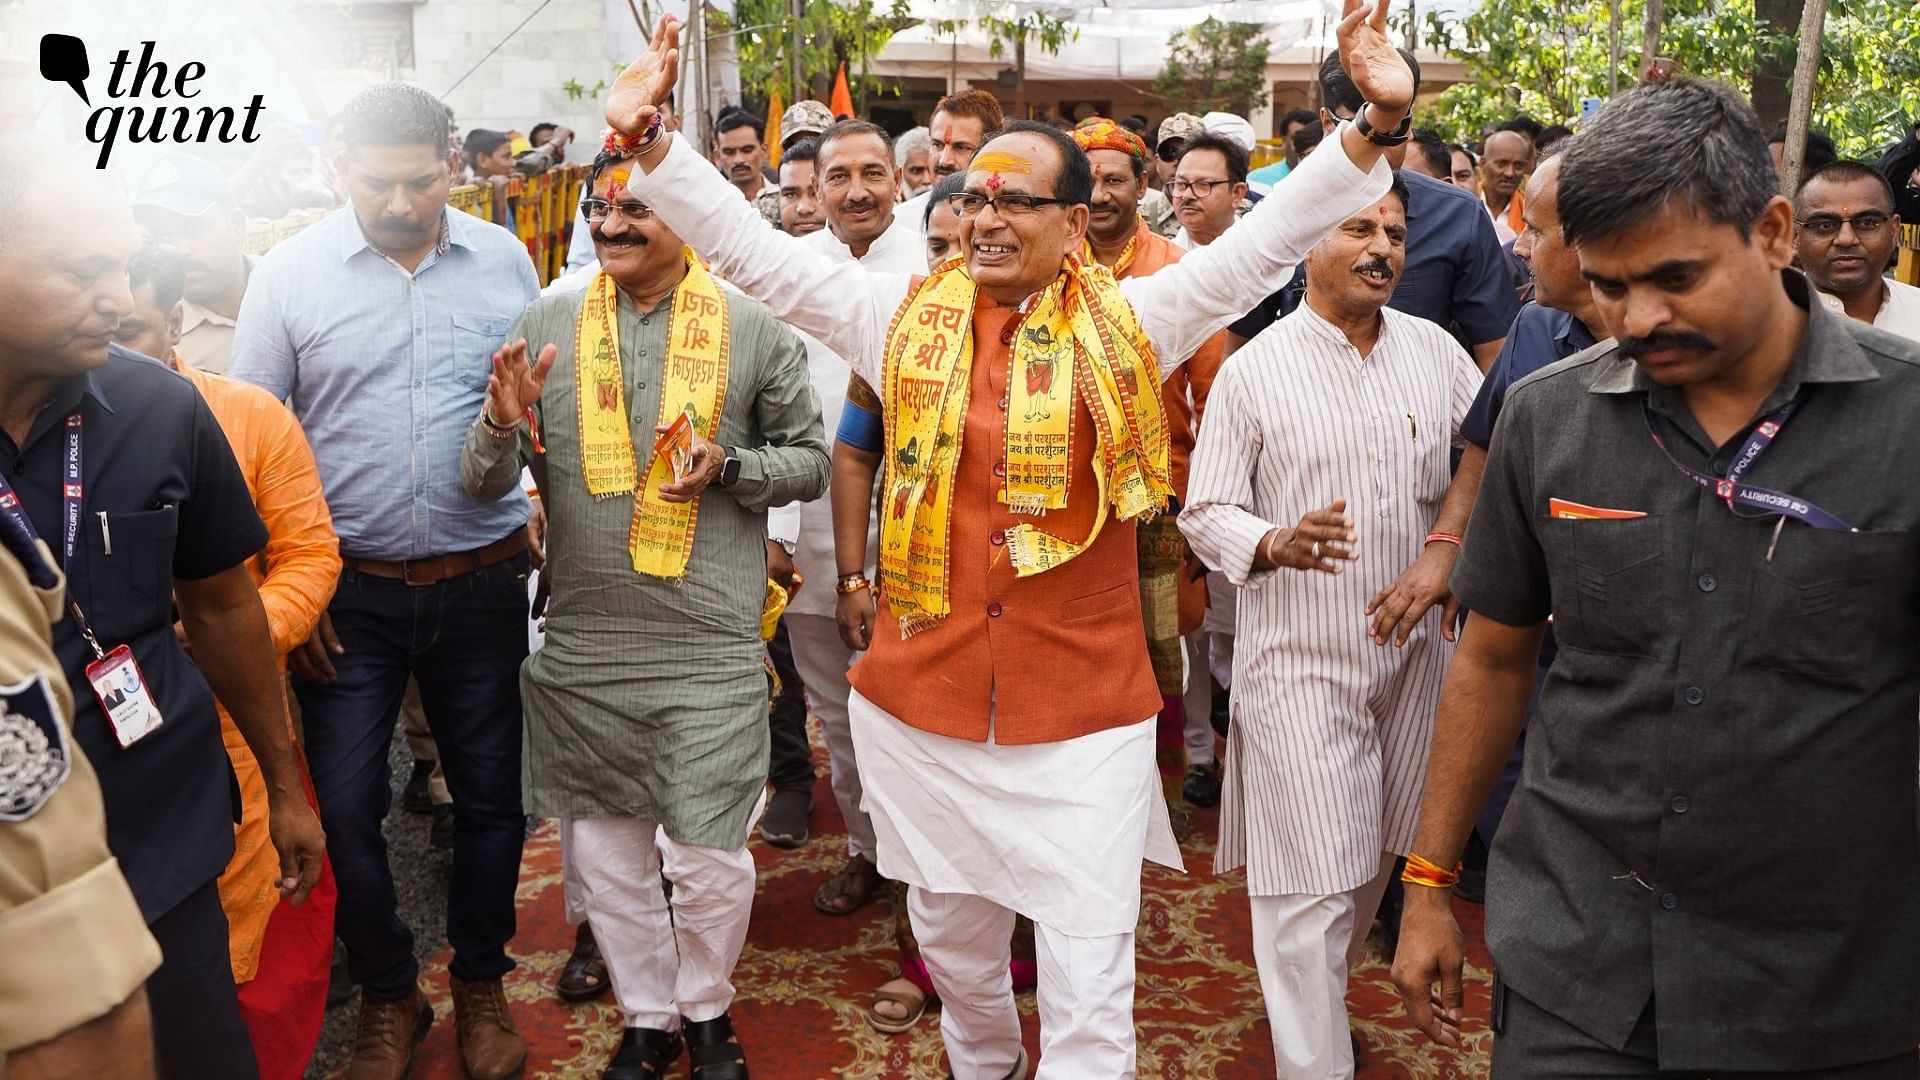 <div class="paragraphs"><p>BJP leaders are hesitant about Shivraj Singh Chouhan as CM candidate due to past losses, sources say.</p></div>